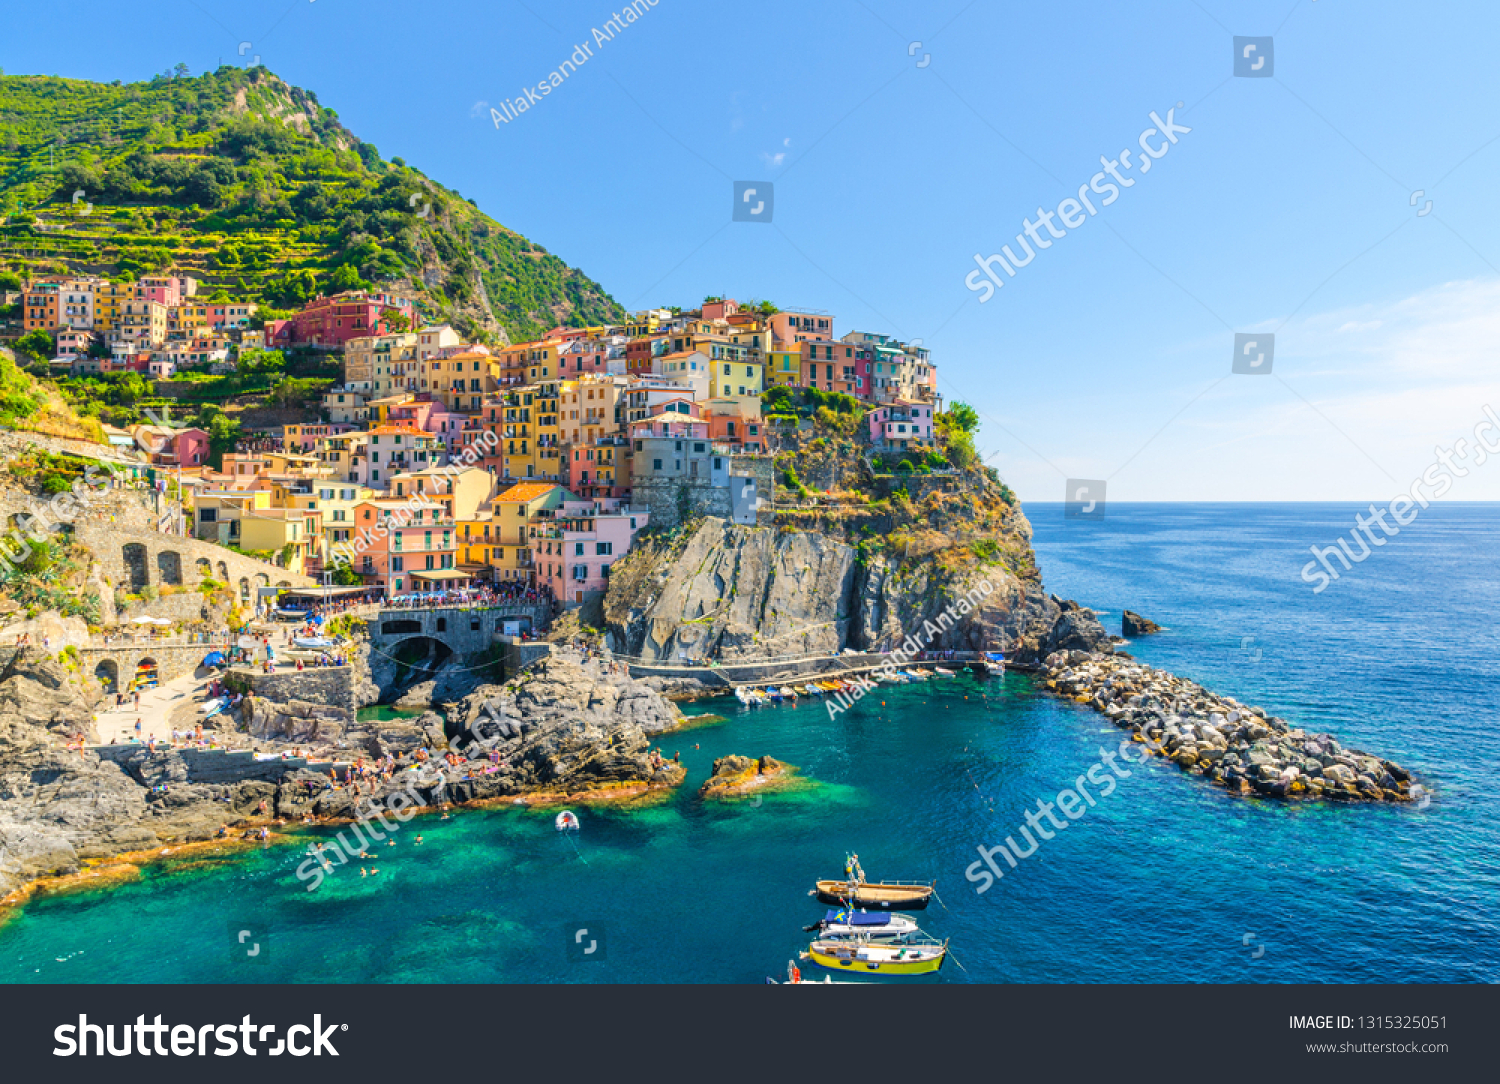 Manarola traditional typical Italian village in National park Cinque Terre, colorful multicolored buildings houses on rock cliff, fishing boats on water, blue sky background, La Spezia, Liguria, Italy #1315325051